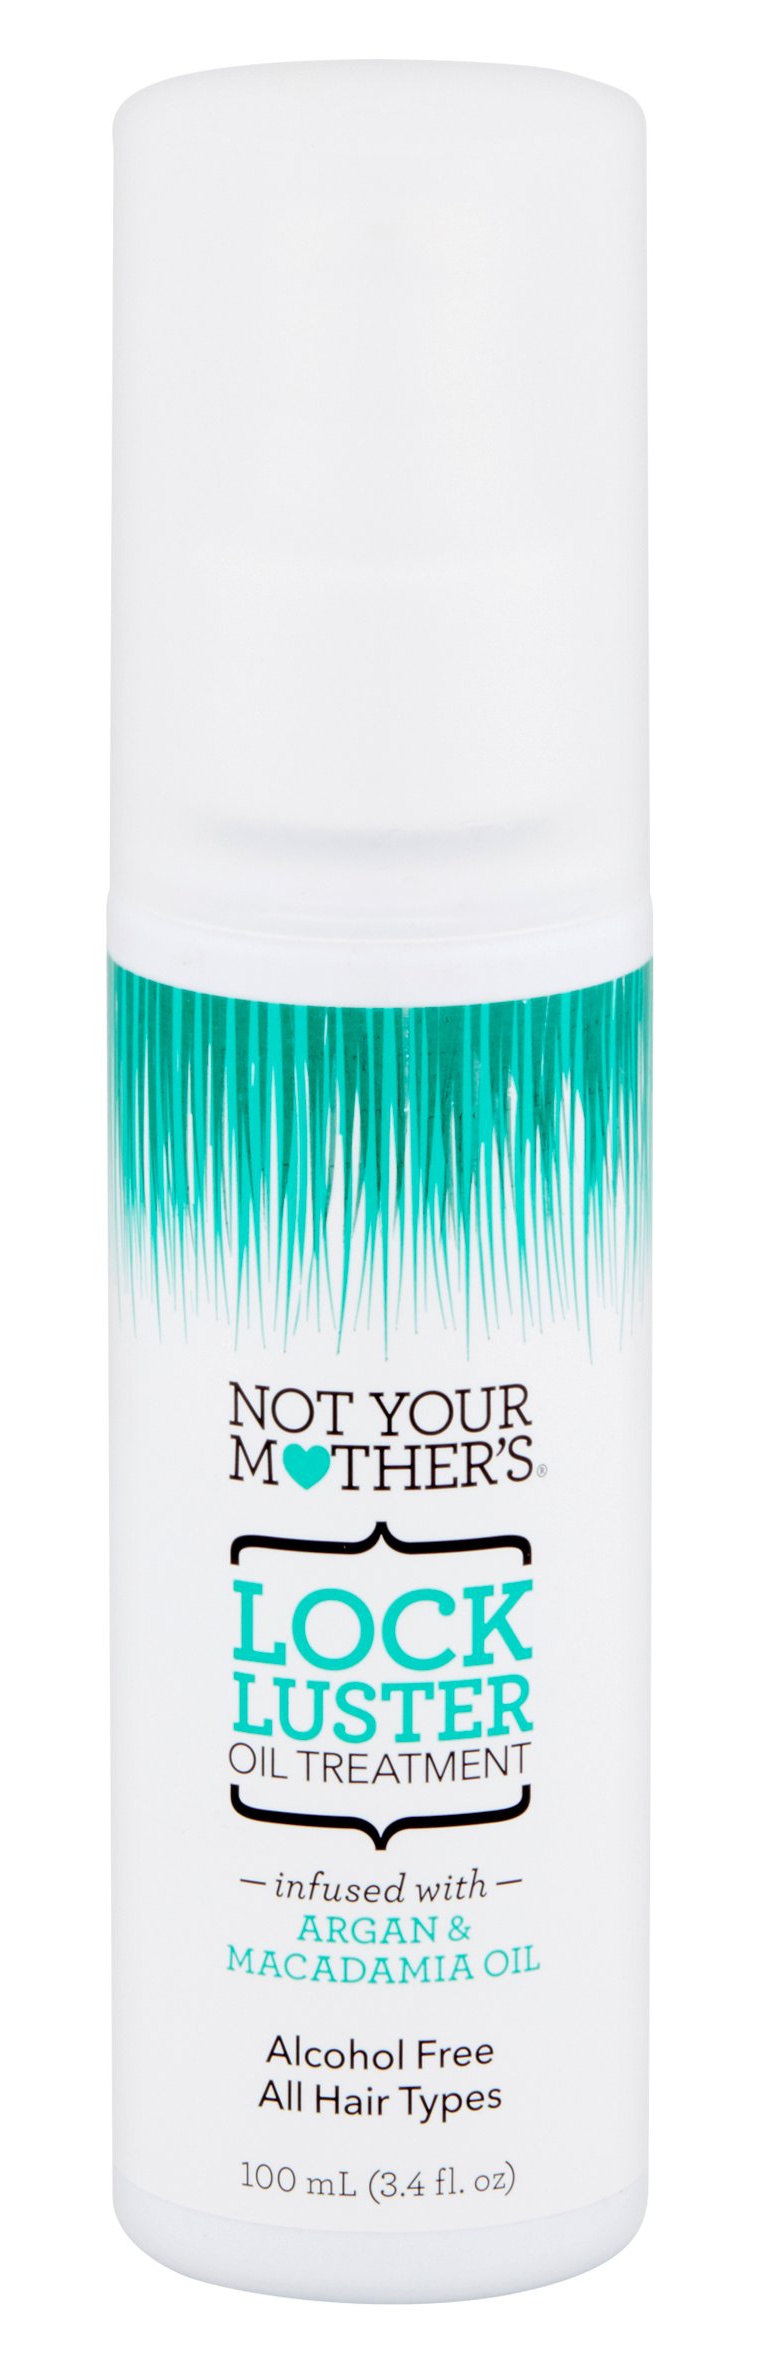 not your mother's Lock Luster Oil Treatment